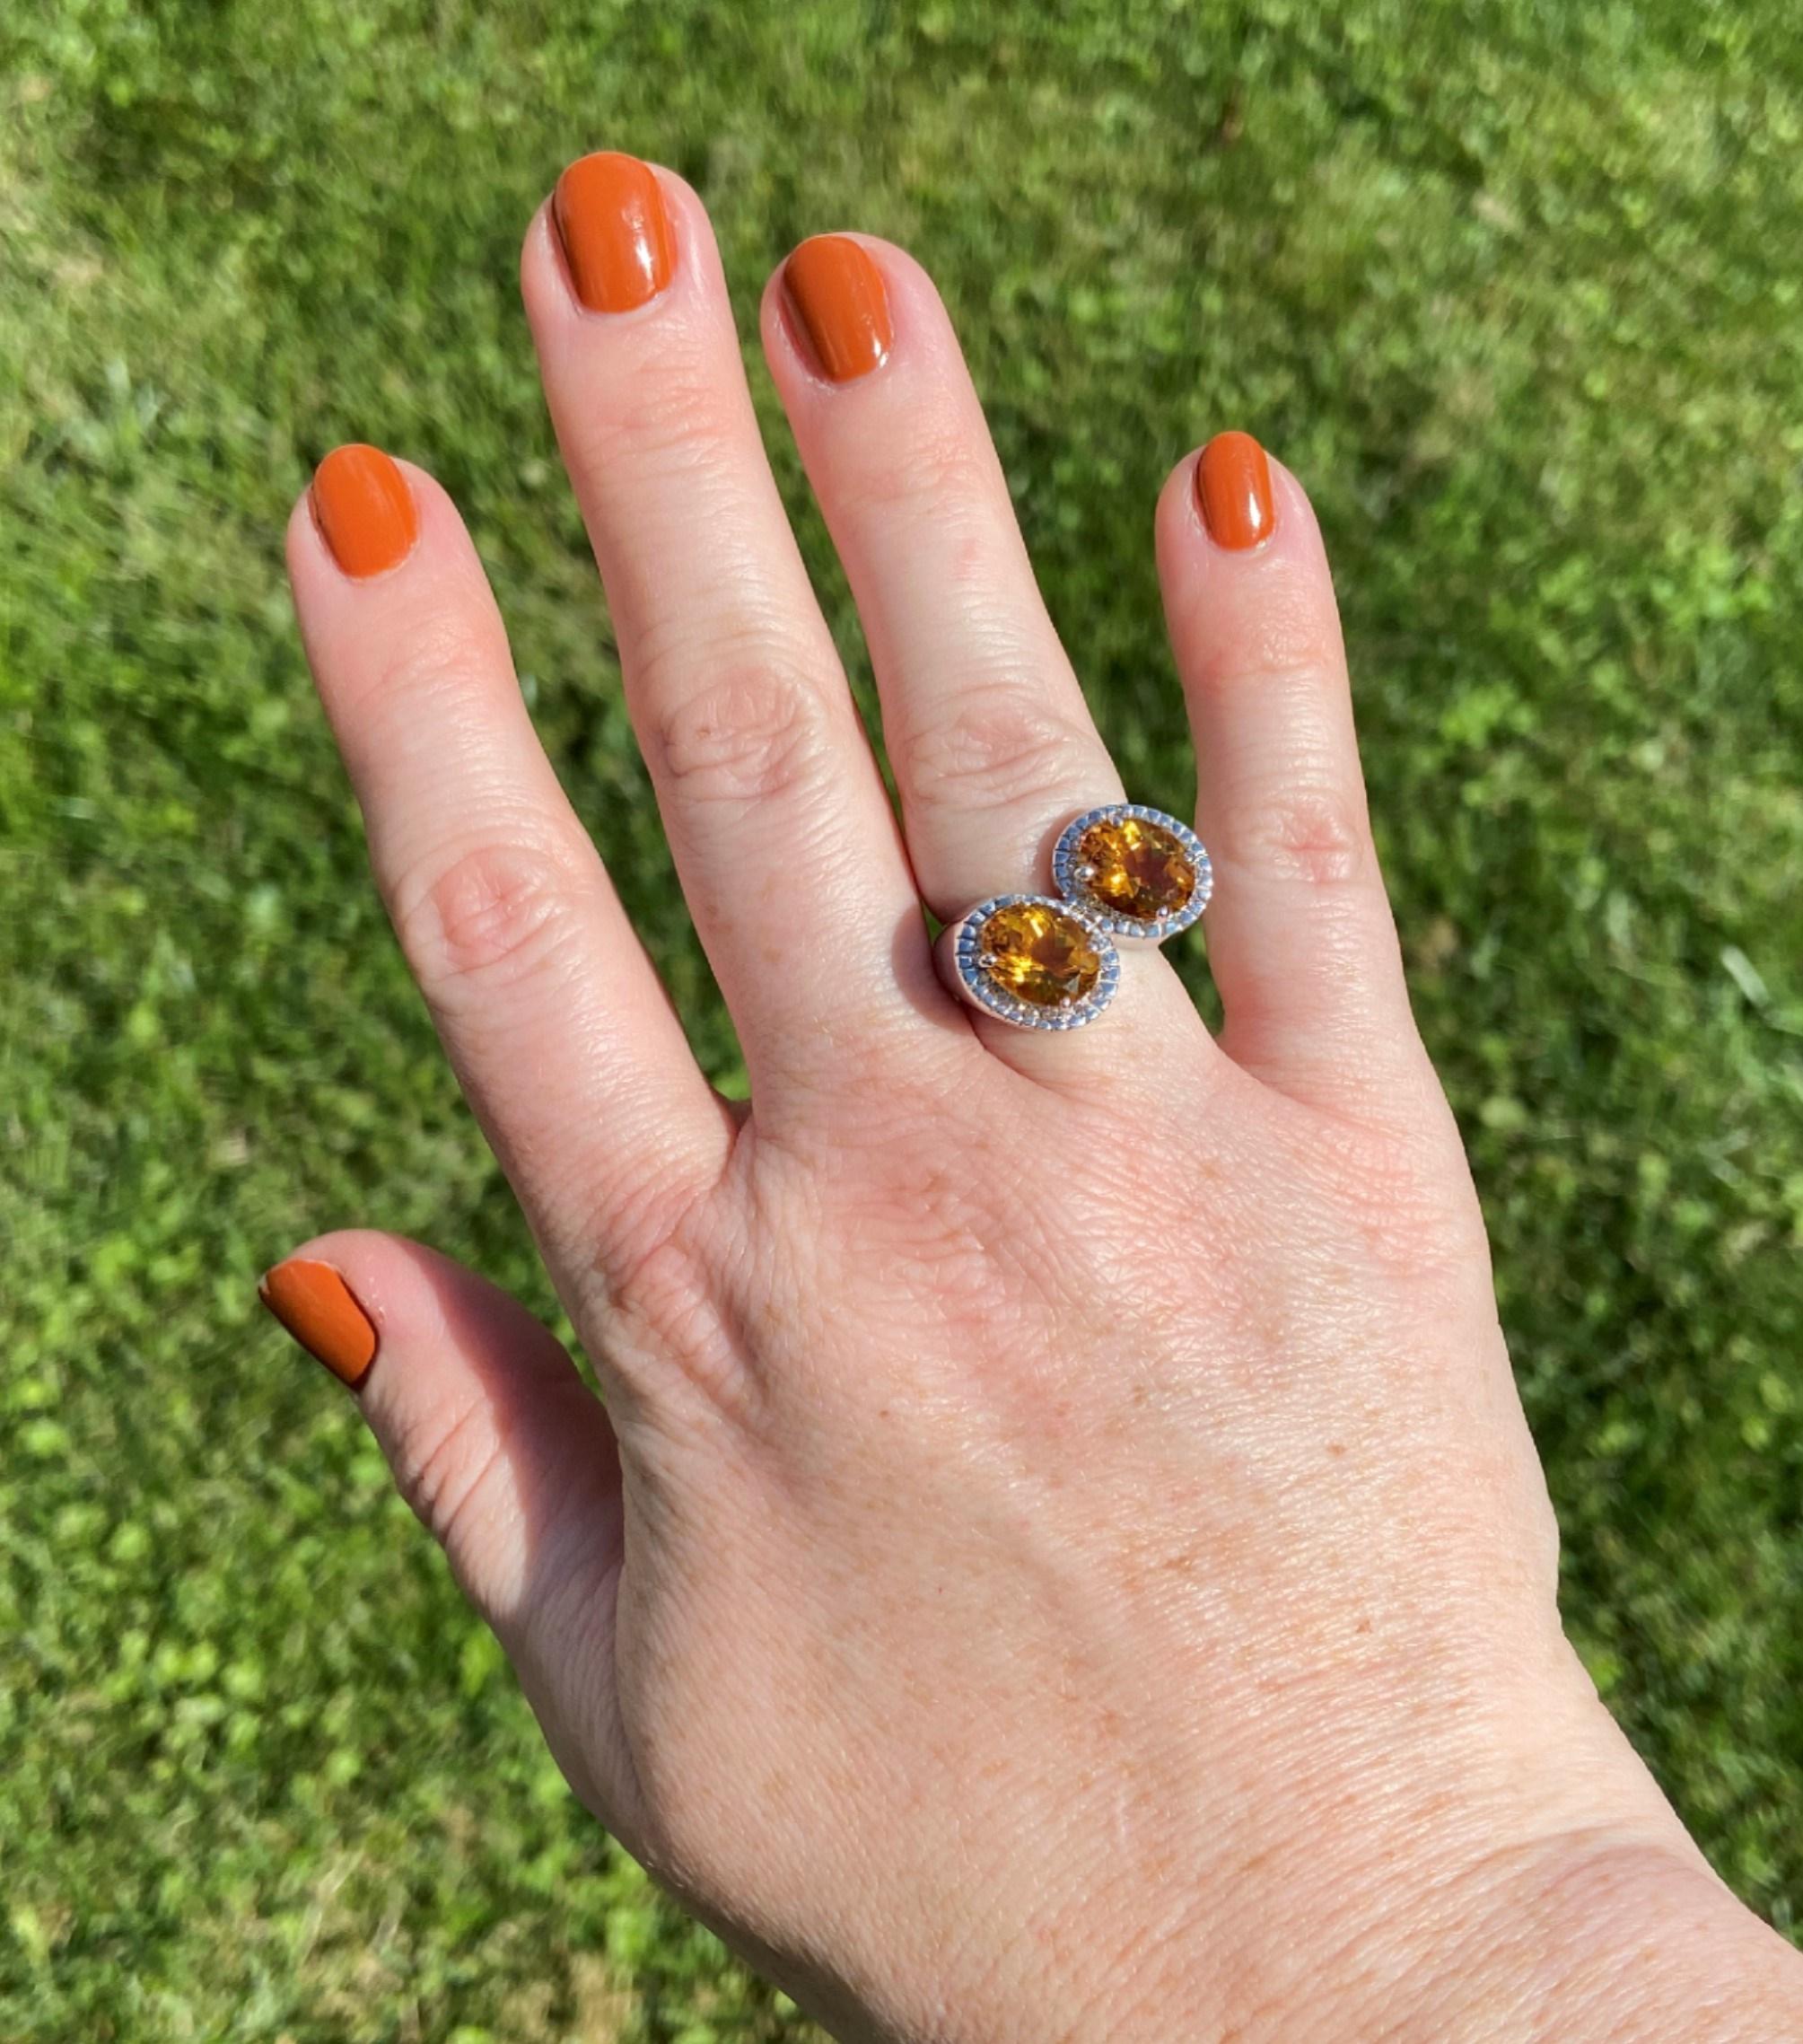 What's better than one exceptionally colored citrine? Two! This modern iteration of the famous toi et moi style ring features two golden honey-colored citrines totaling 4.65tcw. 

